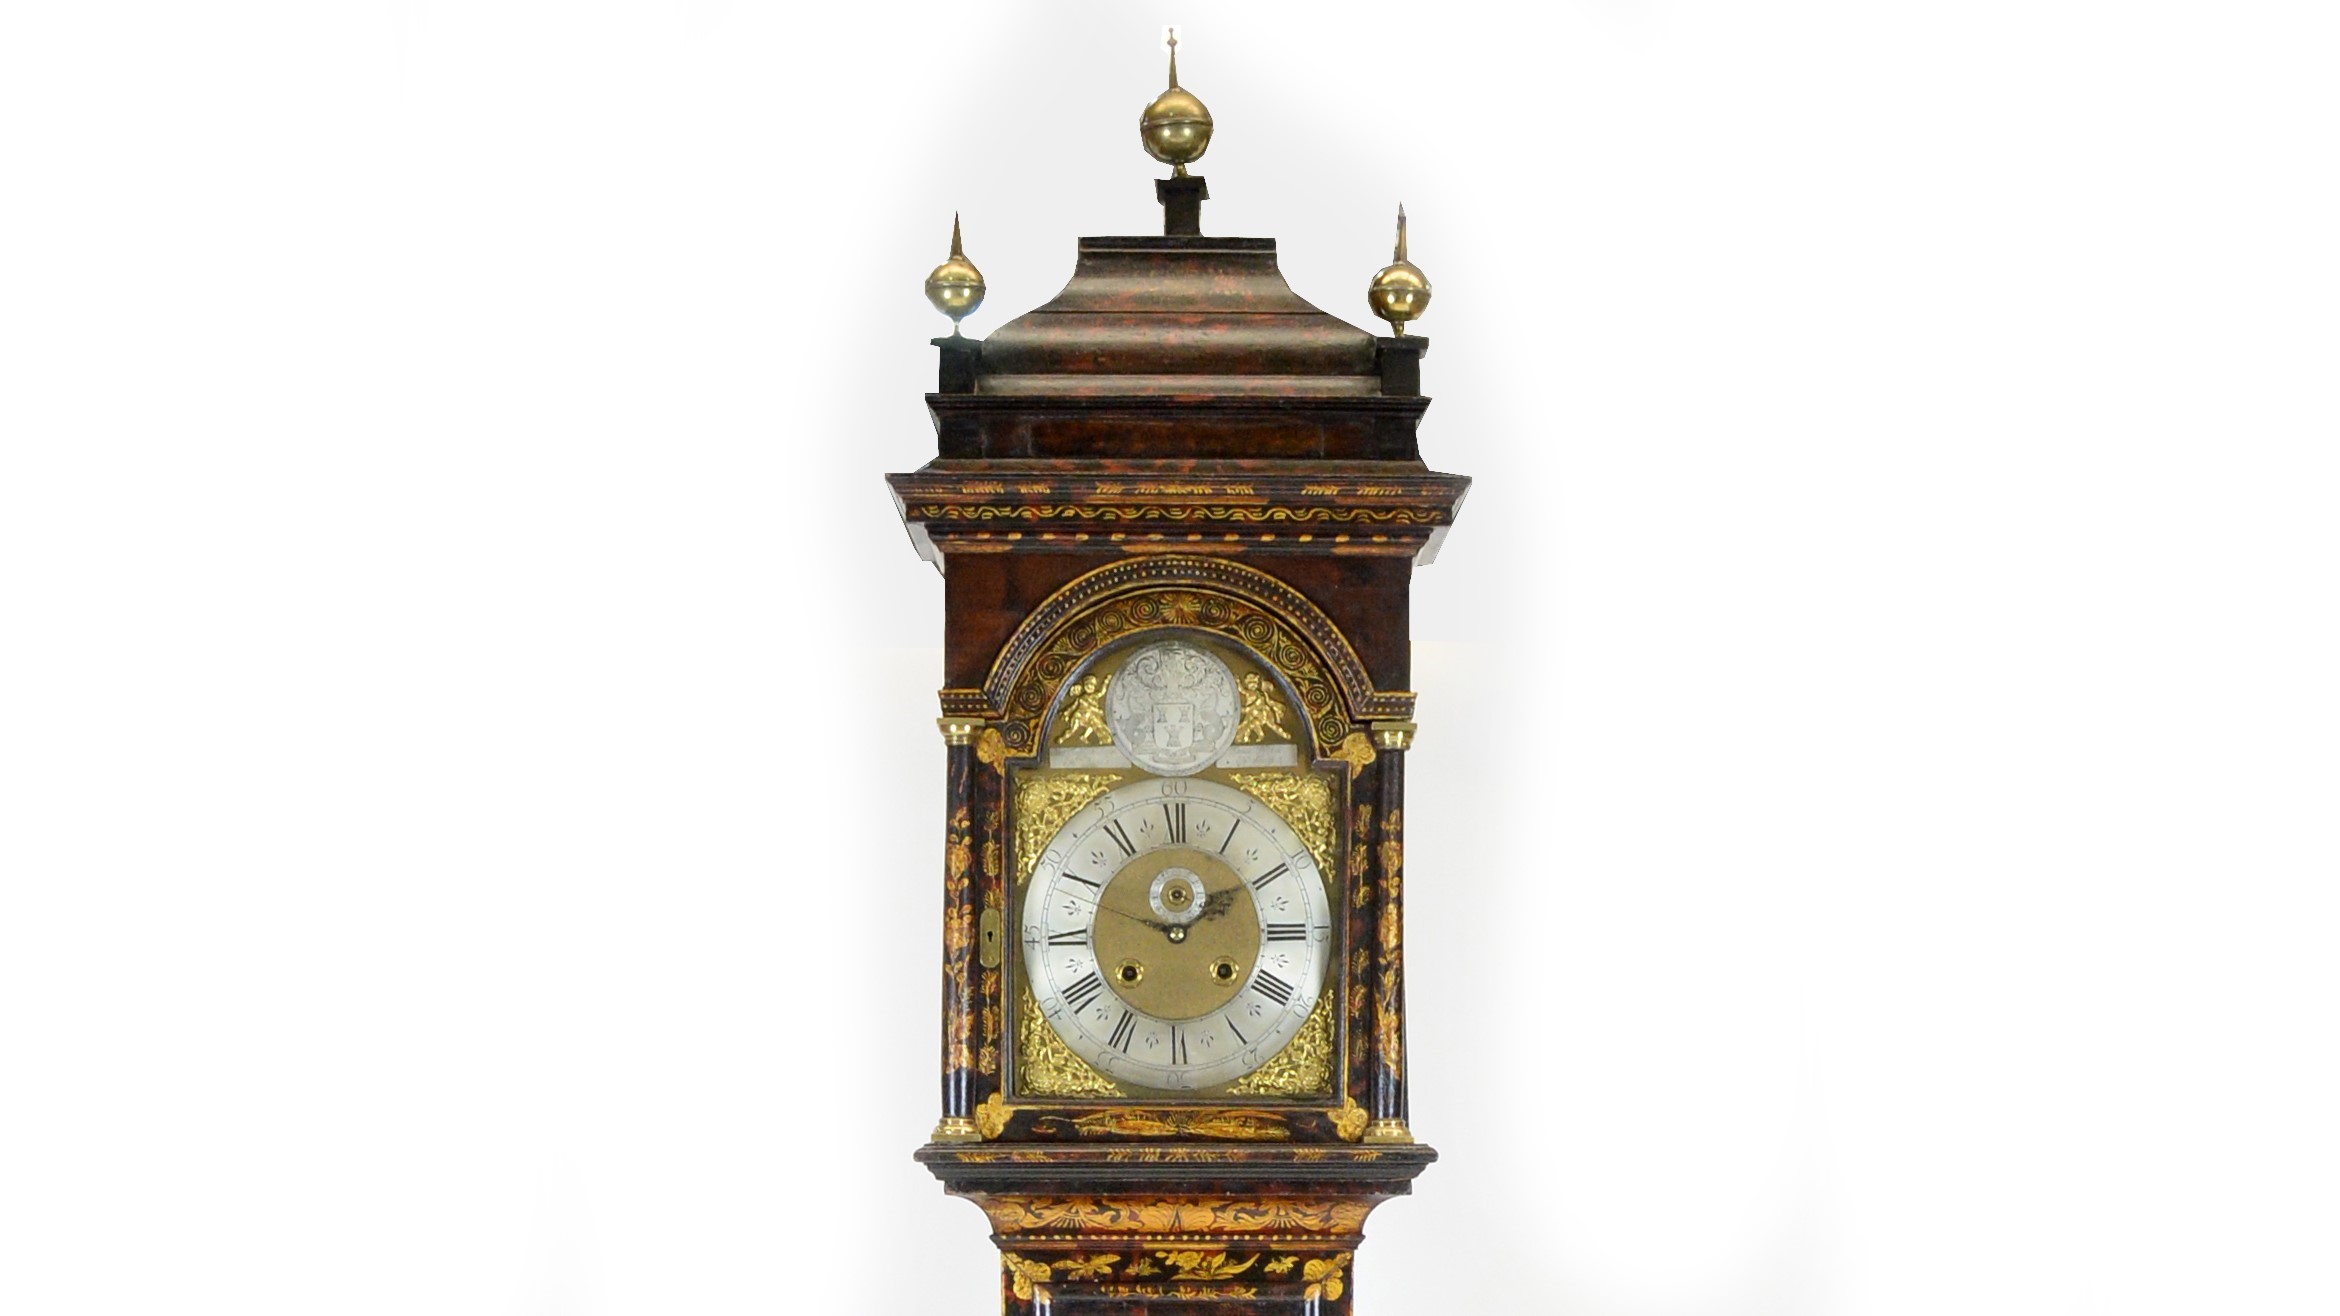 Newcastle’s Mansion House clock goes up for Auction